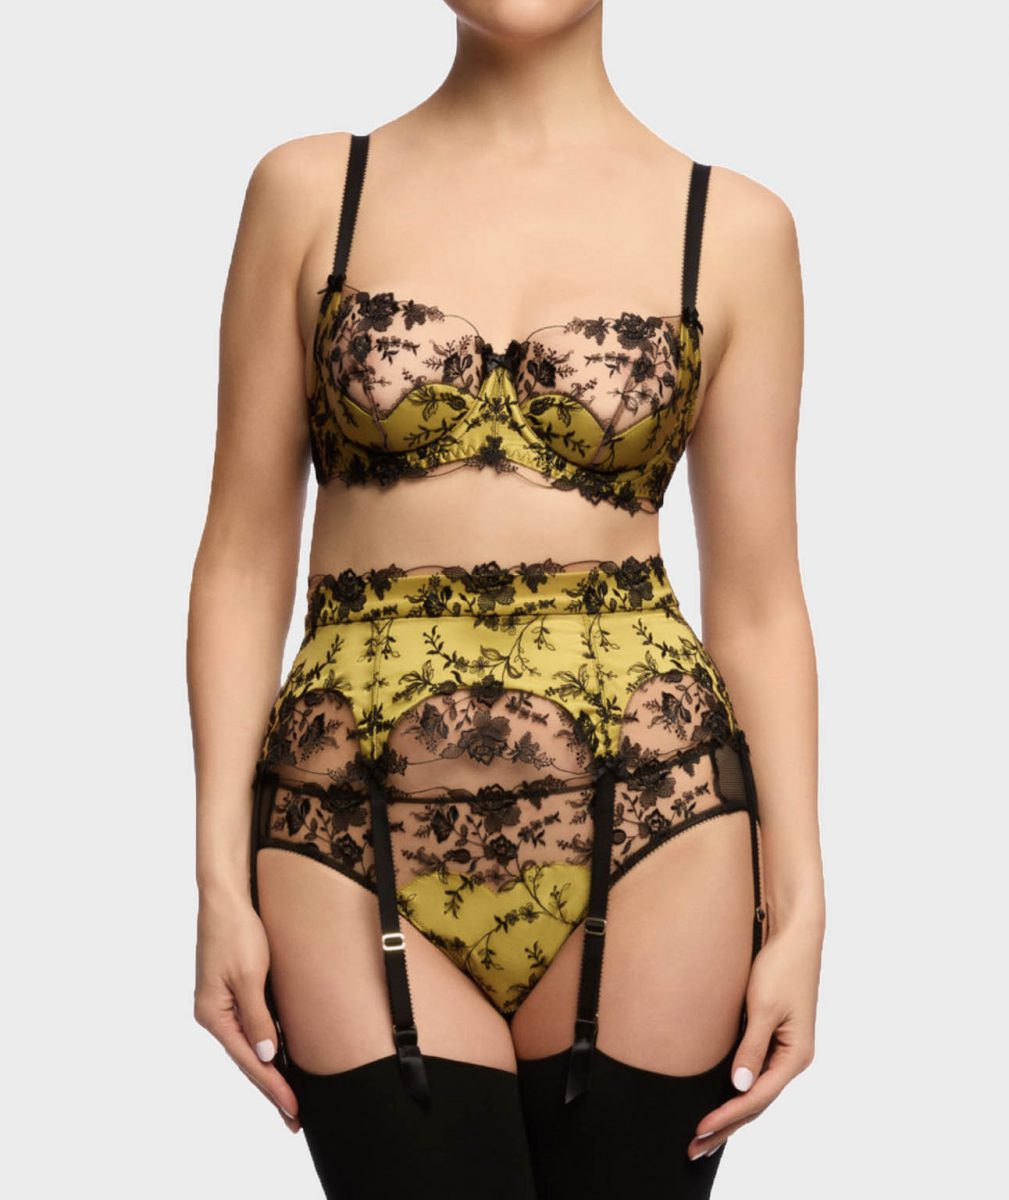 Dita Von Teese Lingerie Victresse set in chartreuse and black